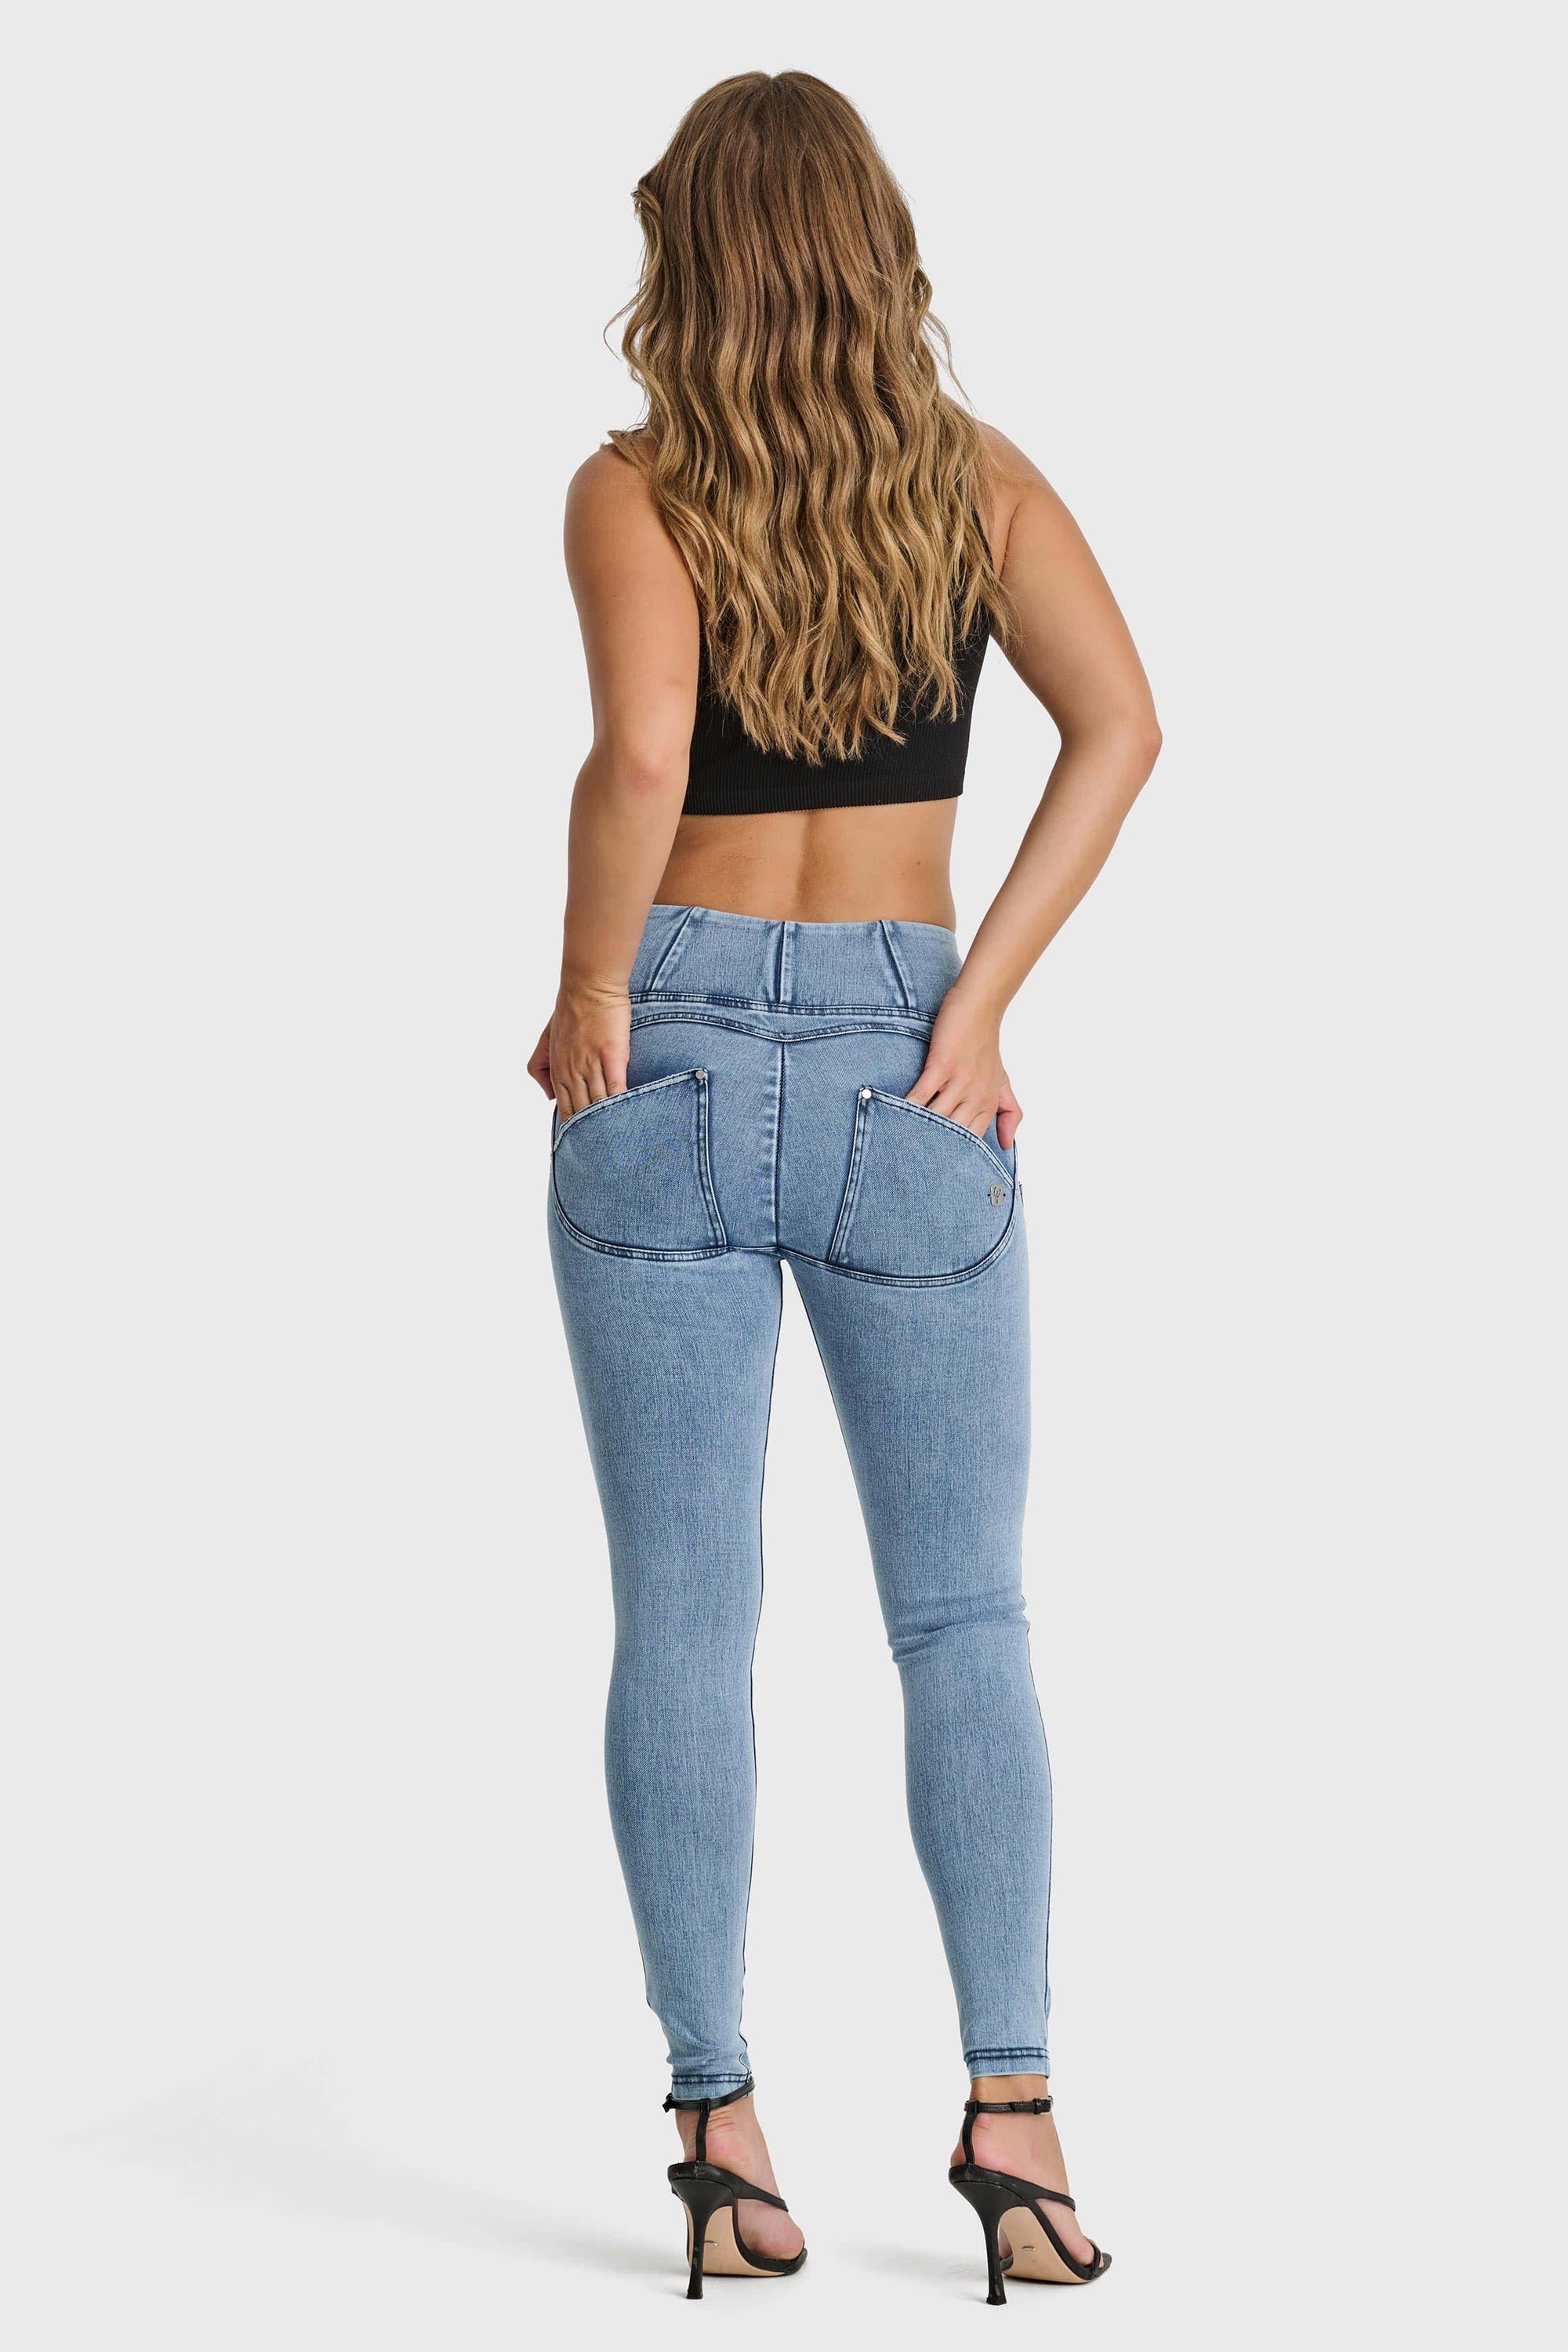 WR.UP® Snug Distressed Jeans - High Waisted - Full Length - Light Blue + Blue Stitching 5